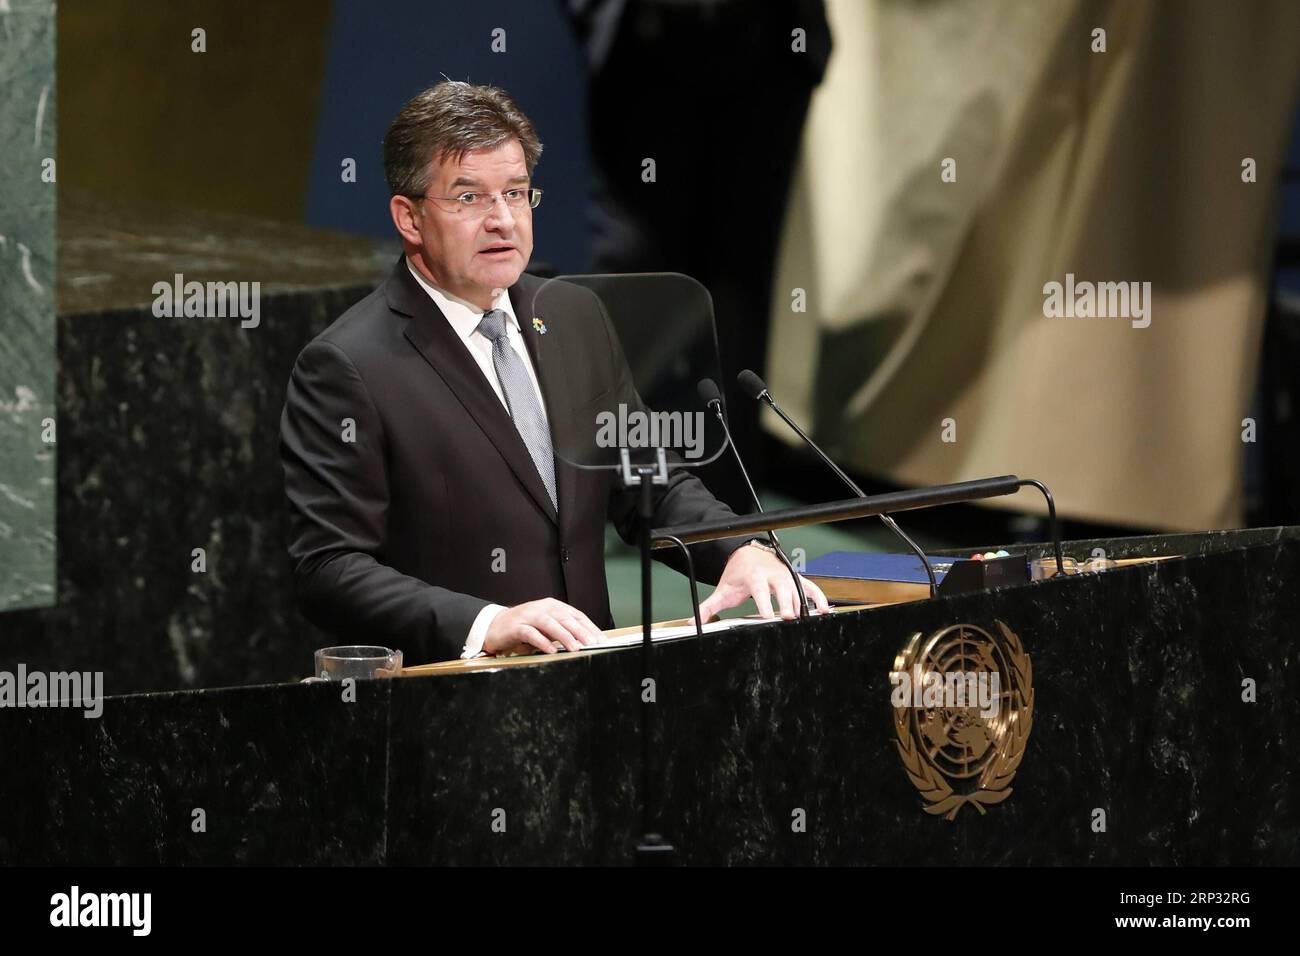 (180917) -- UNITED NATIONS, Sept. 17, 2018 -- Miroslav Lajcak, President of the 72nd session of the United Nations General Assembly, delivers a speech at the last meeting of the 72nd session of the assembly, at the UN headquarters in New York, Sept. 17, 2018. Outgoing UN General Assembly President Miroslav Lajcak on Monday outlined six major trends he identified during his one-year tenure on his last day in office, highlighting sustaining peace, combat against climate change and UN reform, among other things. ) UN-GENERAL ASSEMBLY-72ND SESSION-LAST MEETING LixMuzi PUBLICATIONxNOTxINxCHN Stock Photo